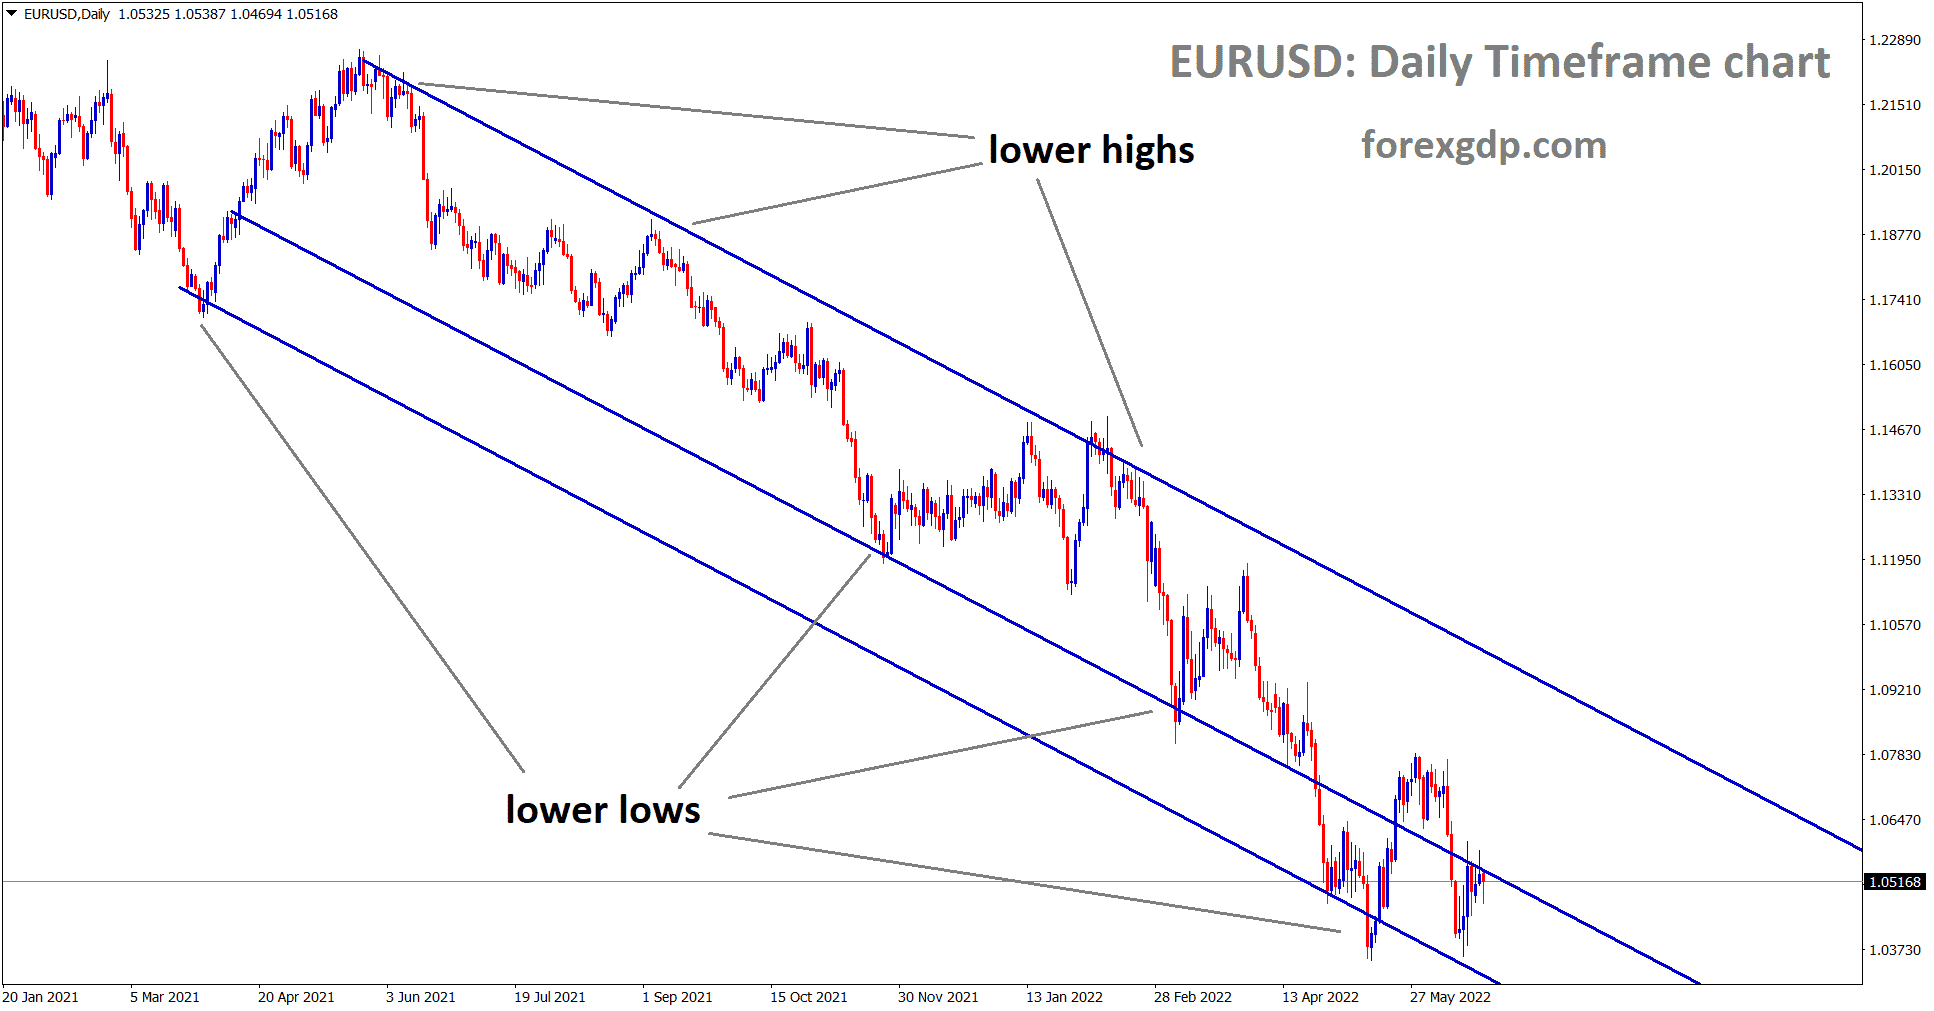 EURUSD is moving in a descending channel and the market has rebounded bounded from the lower low area of the pattern